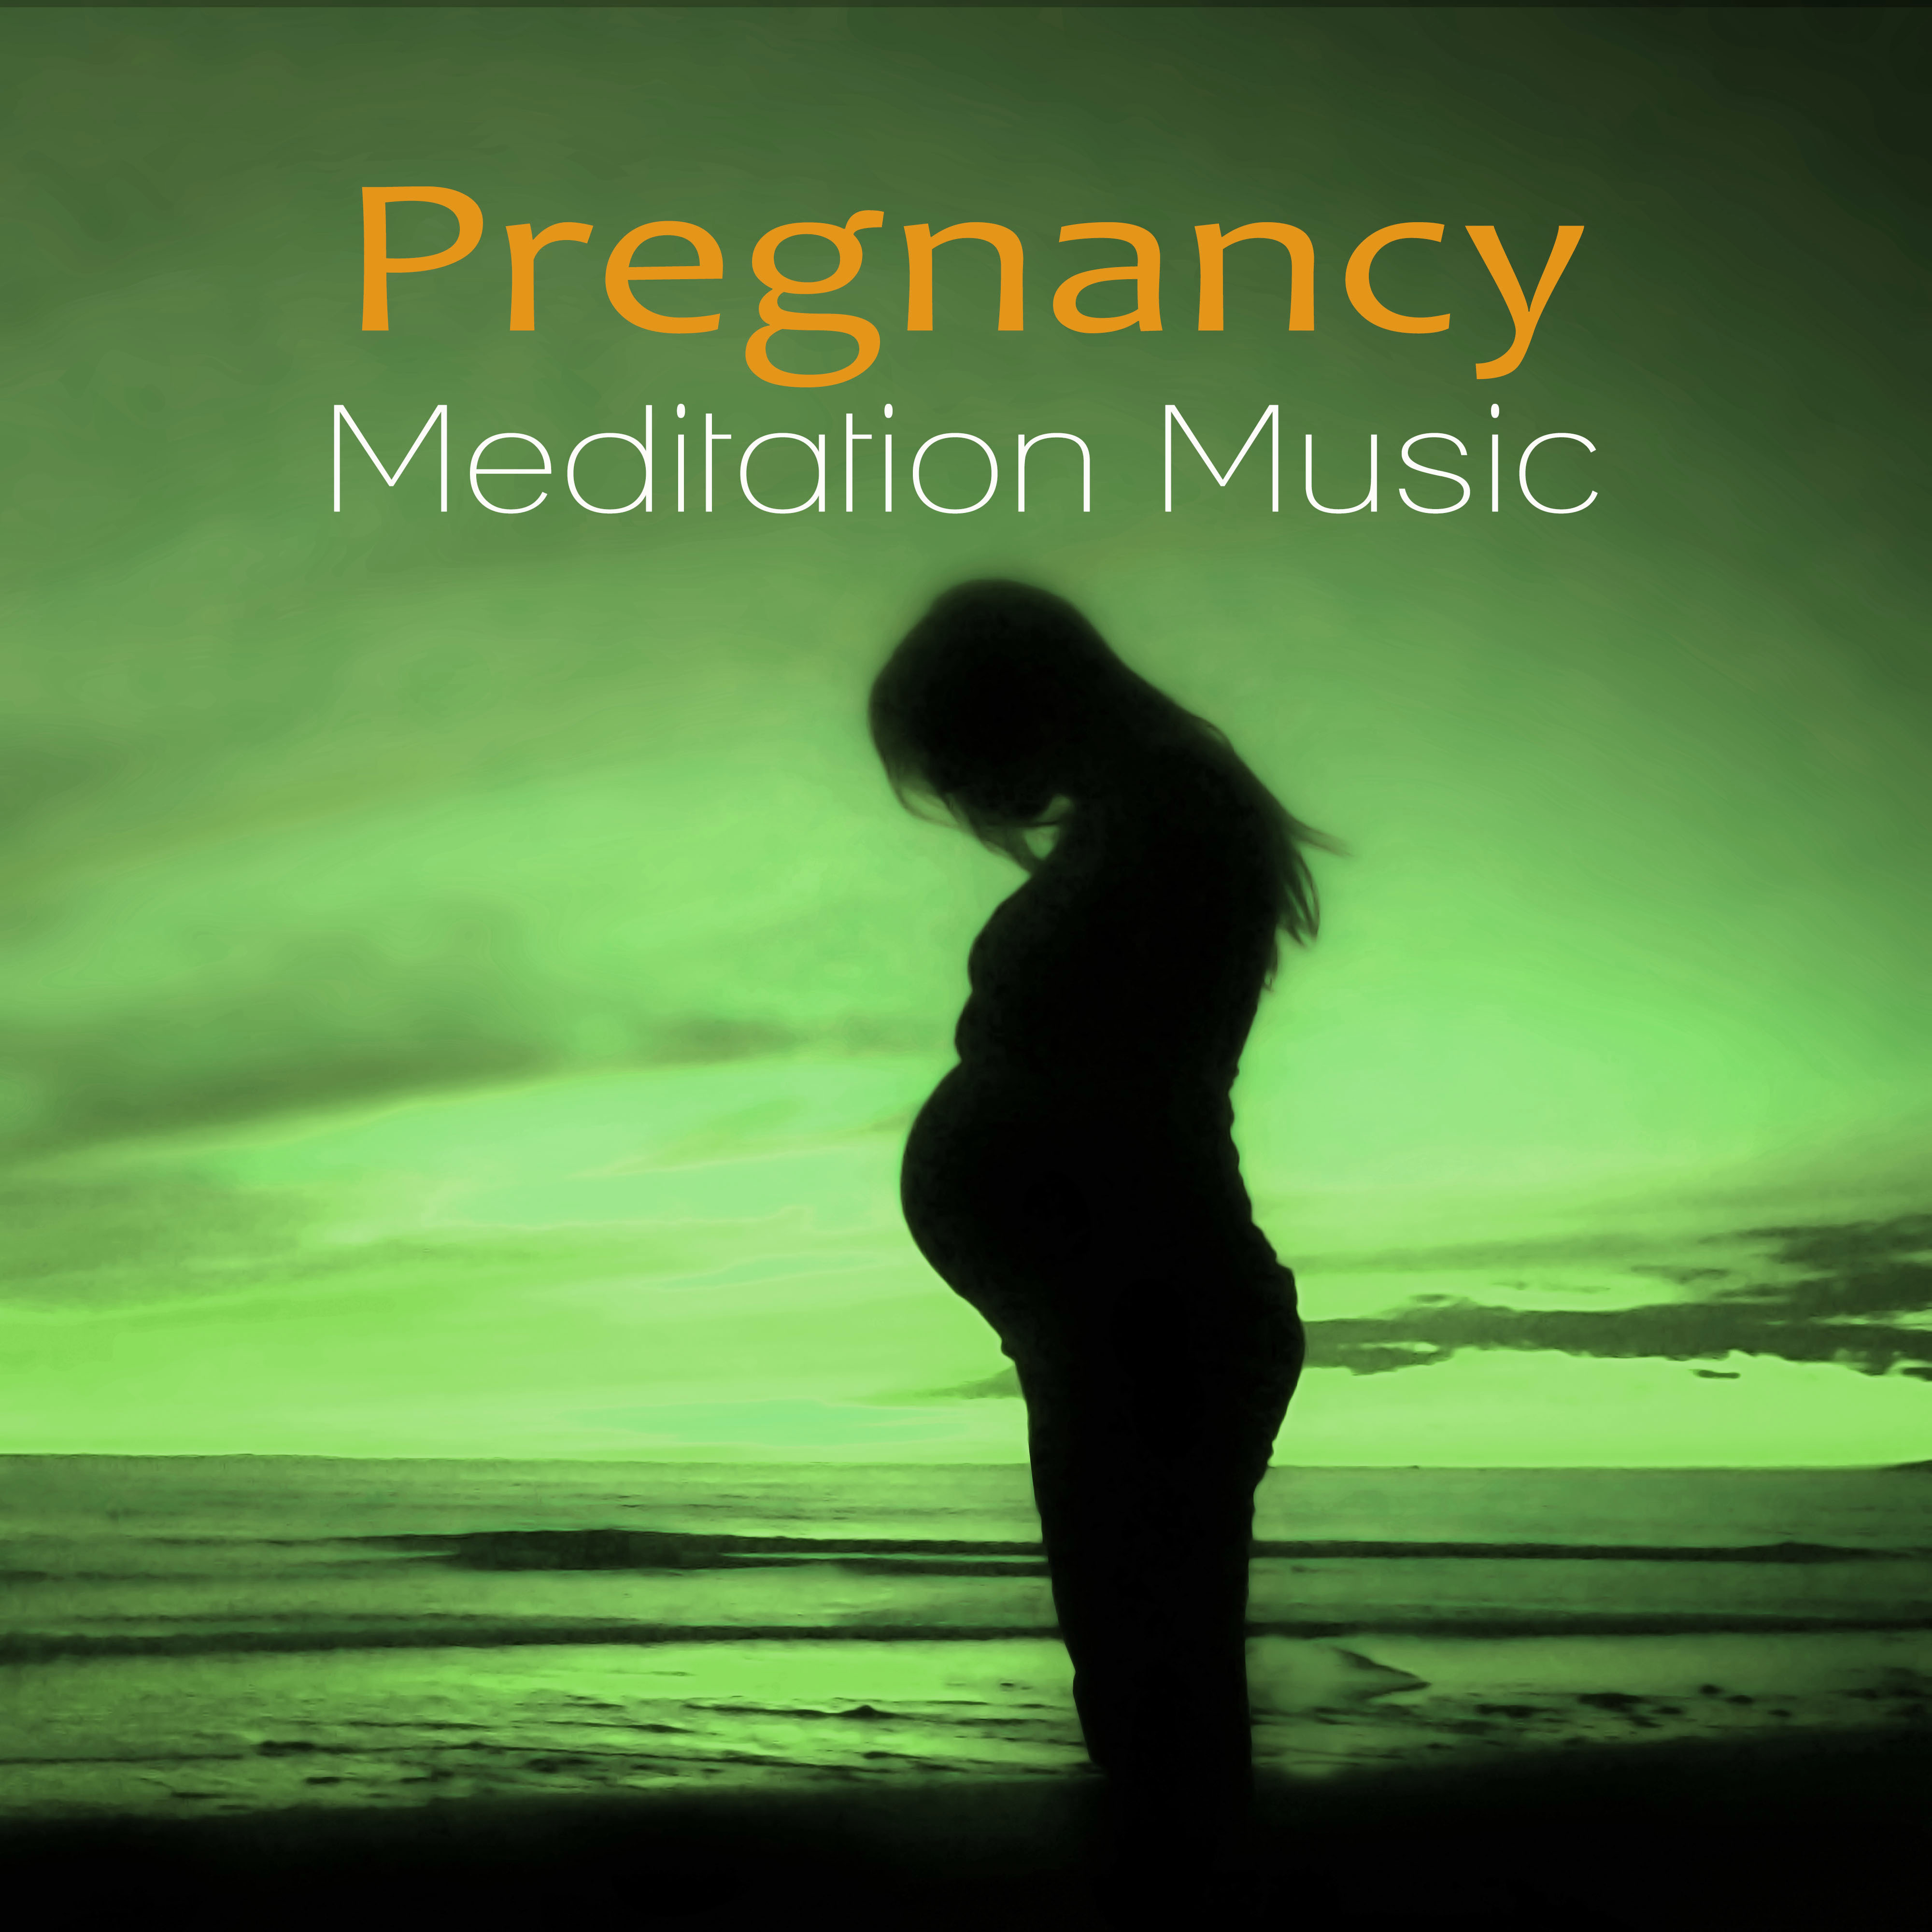 Pregnancy Meditation Music - Nature Sounds, Soothing Calm Music for Pregnant Women, Giving Birth